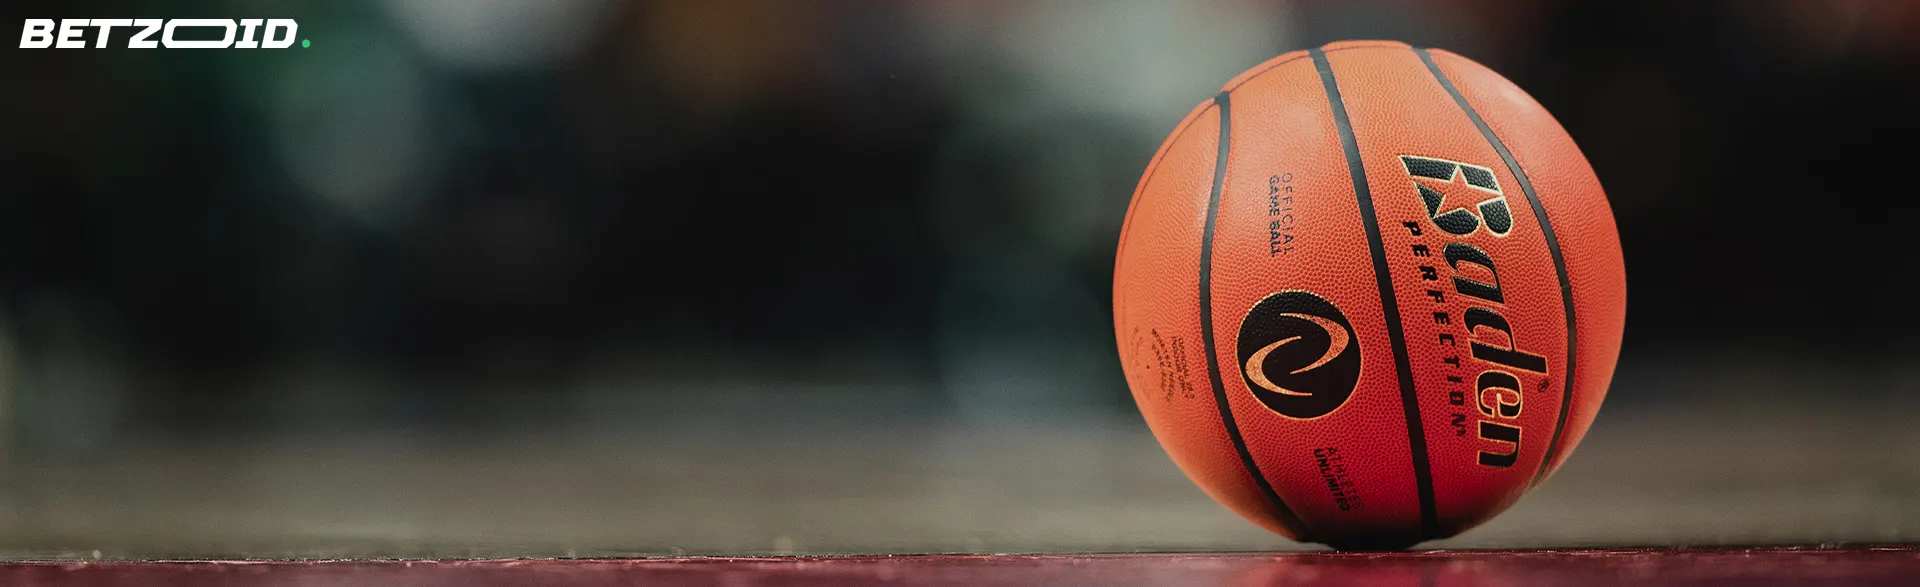 A close-up shot of a basketball on a court, representing Manitoba betting sites with a focus on sports and activities.